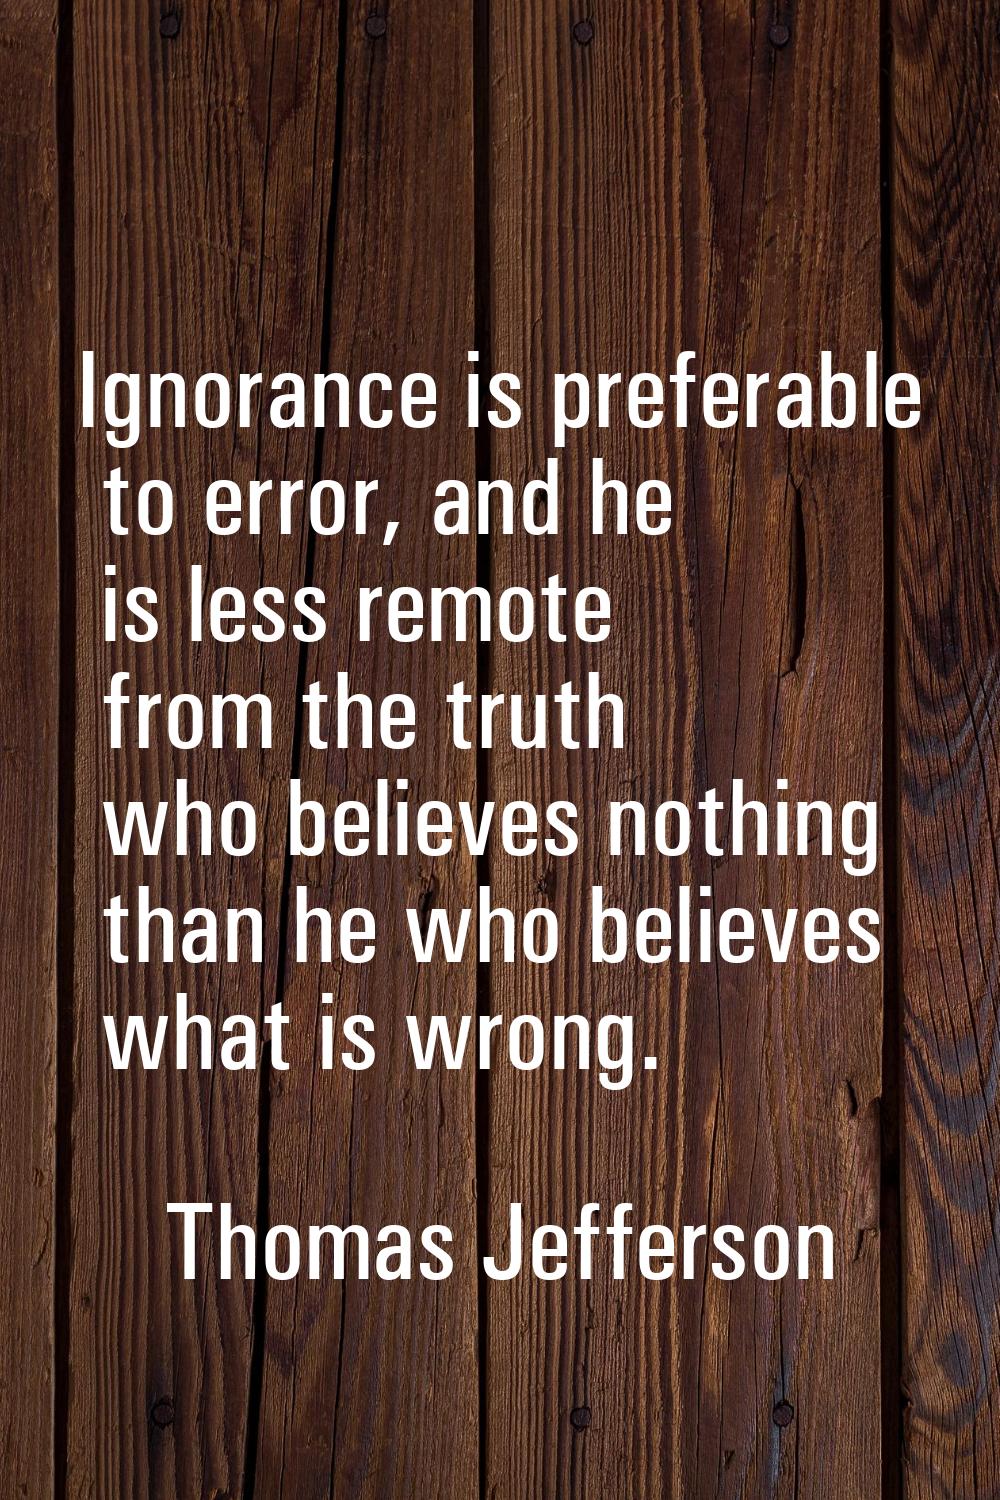 Ignorance is preferable to error, and he is less remote from the truth who believes nothing than he